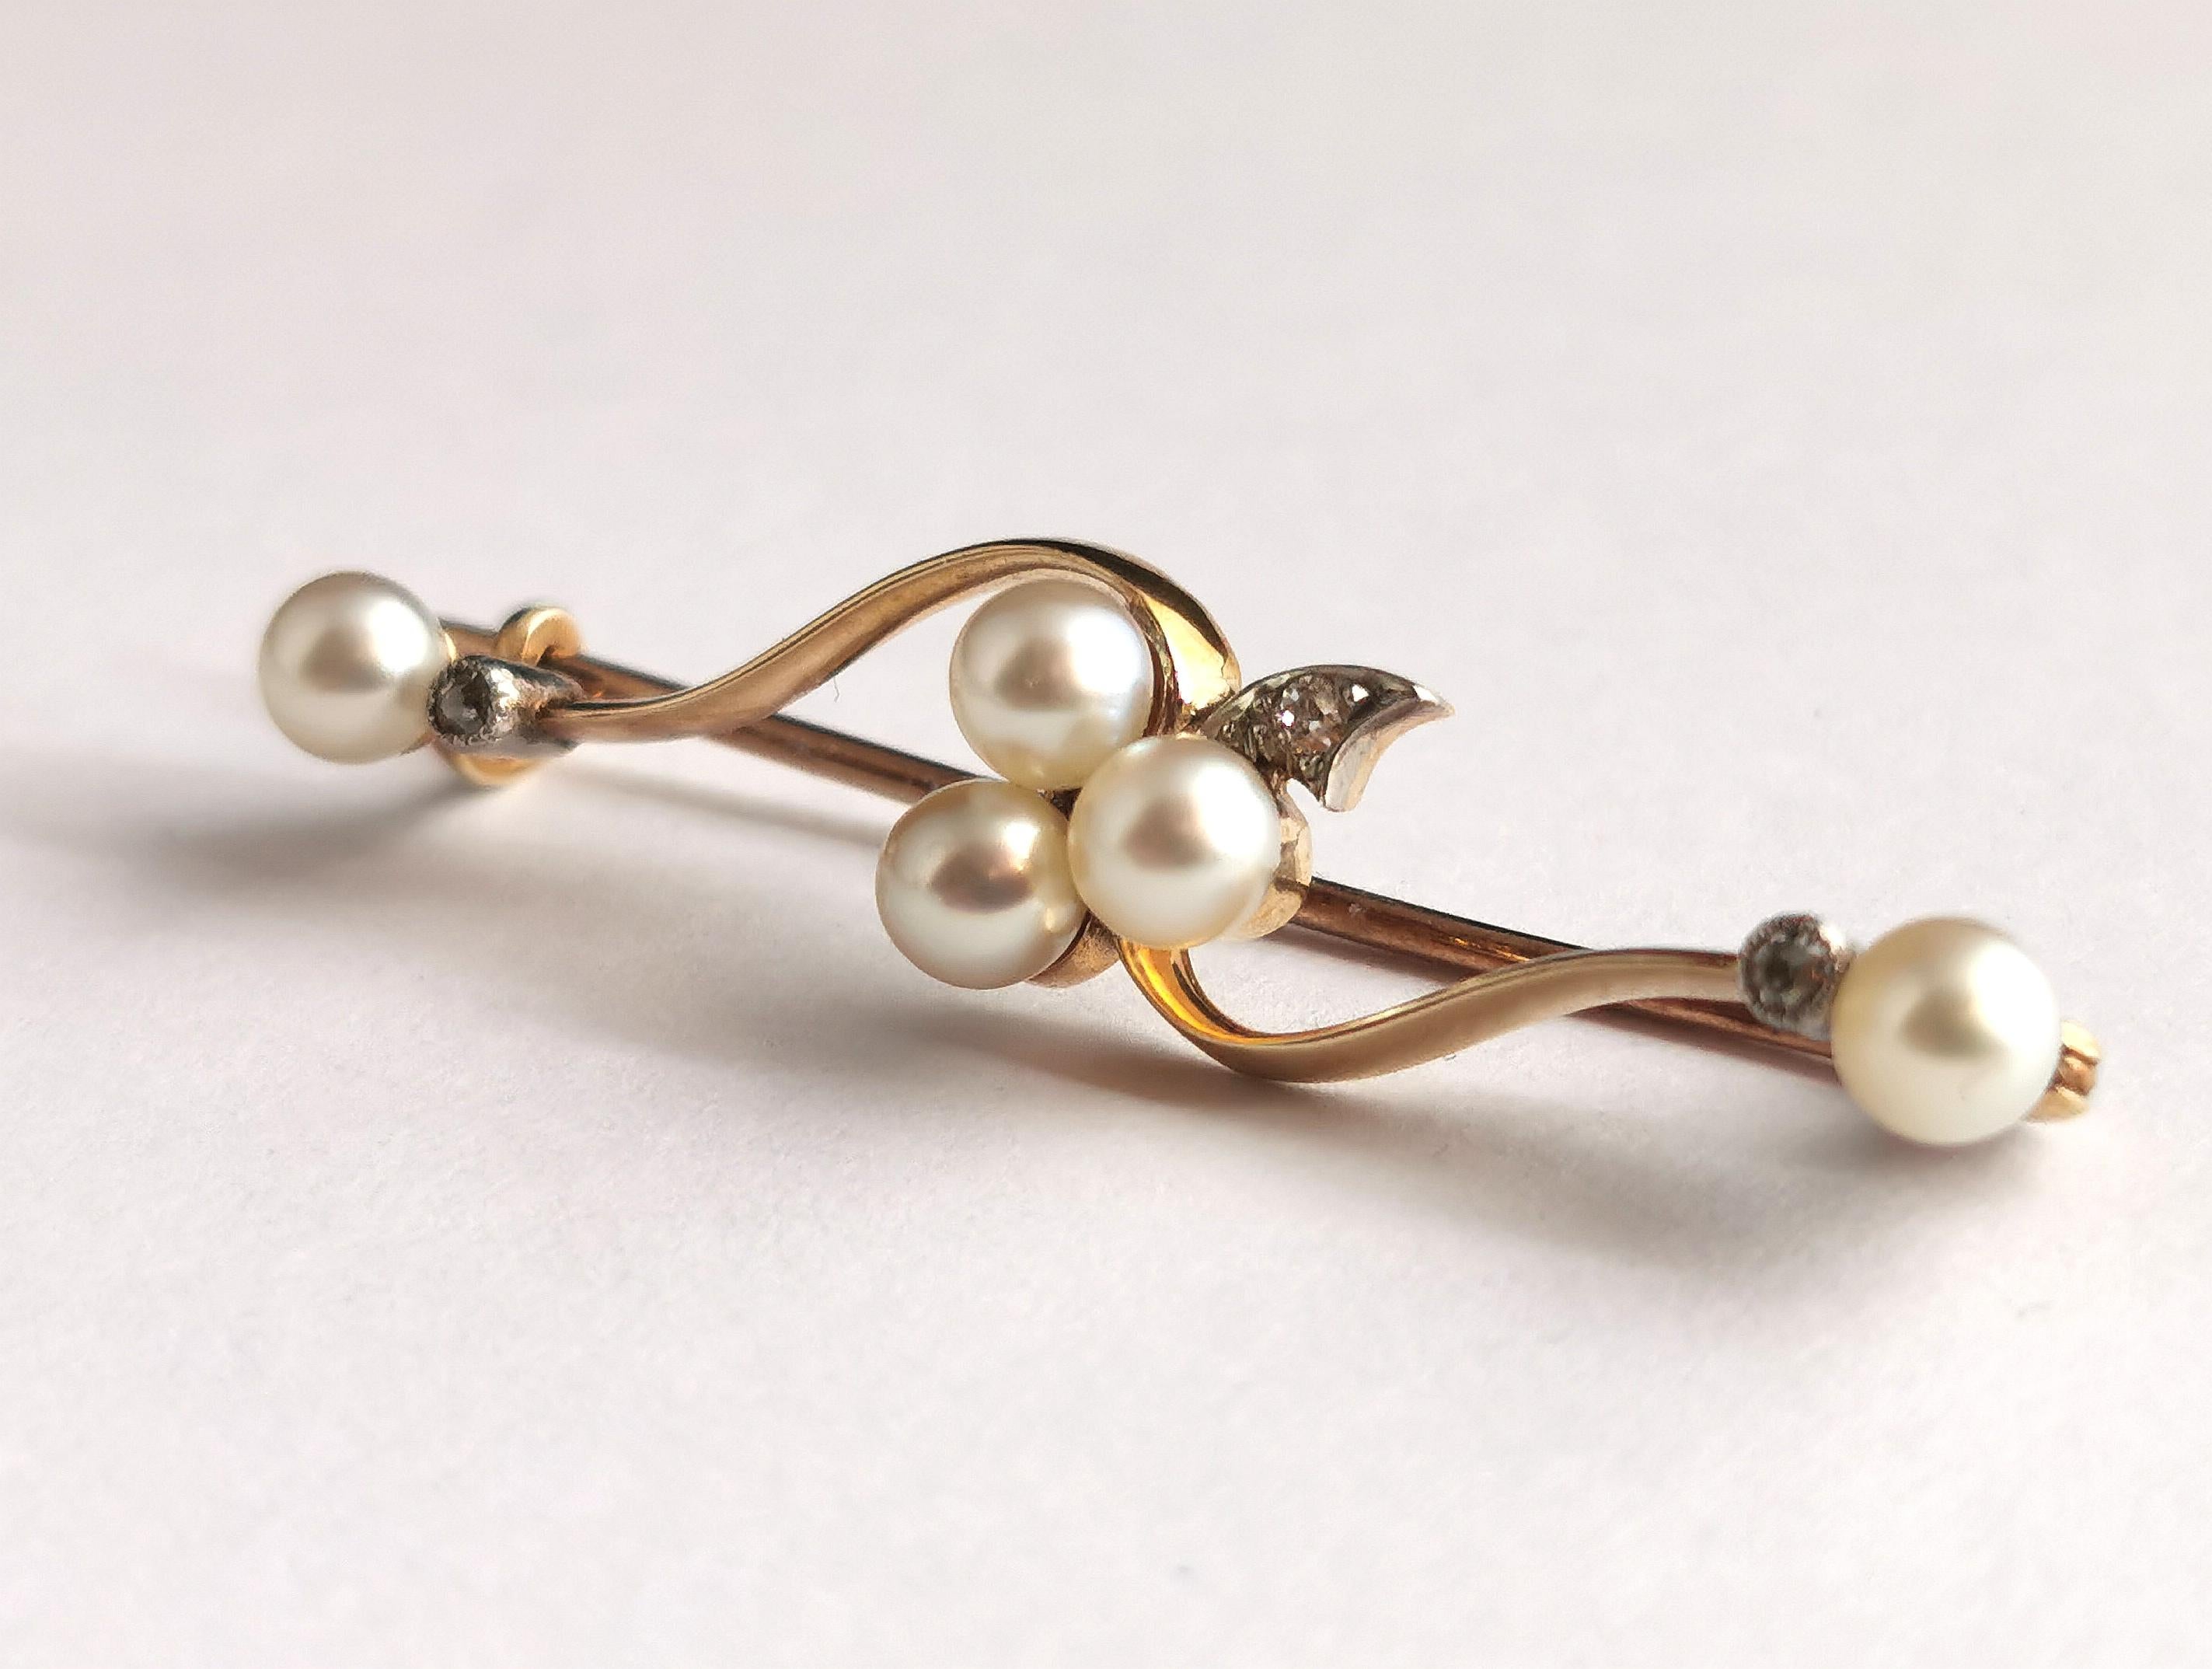 Antique Diamond and Pearl Shamrock Brooch, 9k Gold and Silver 10